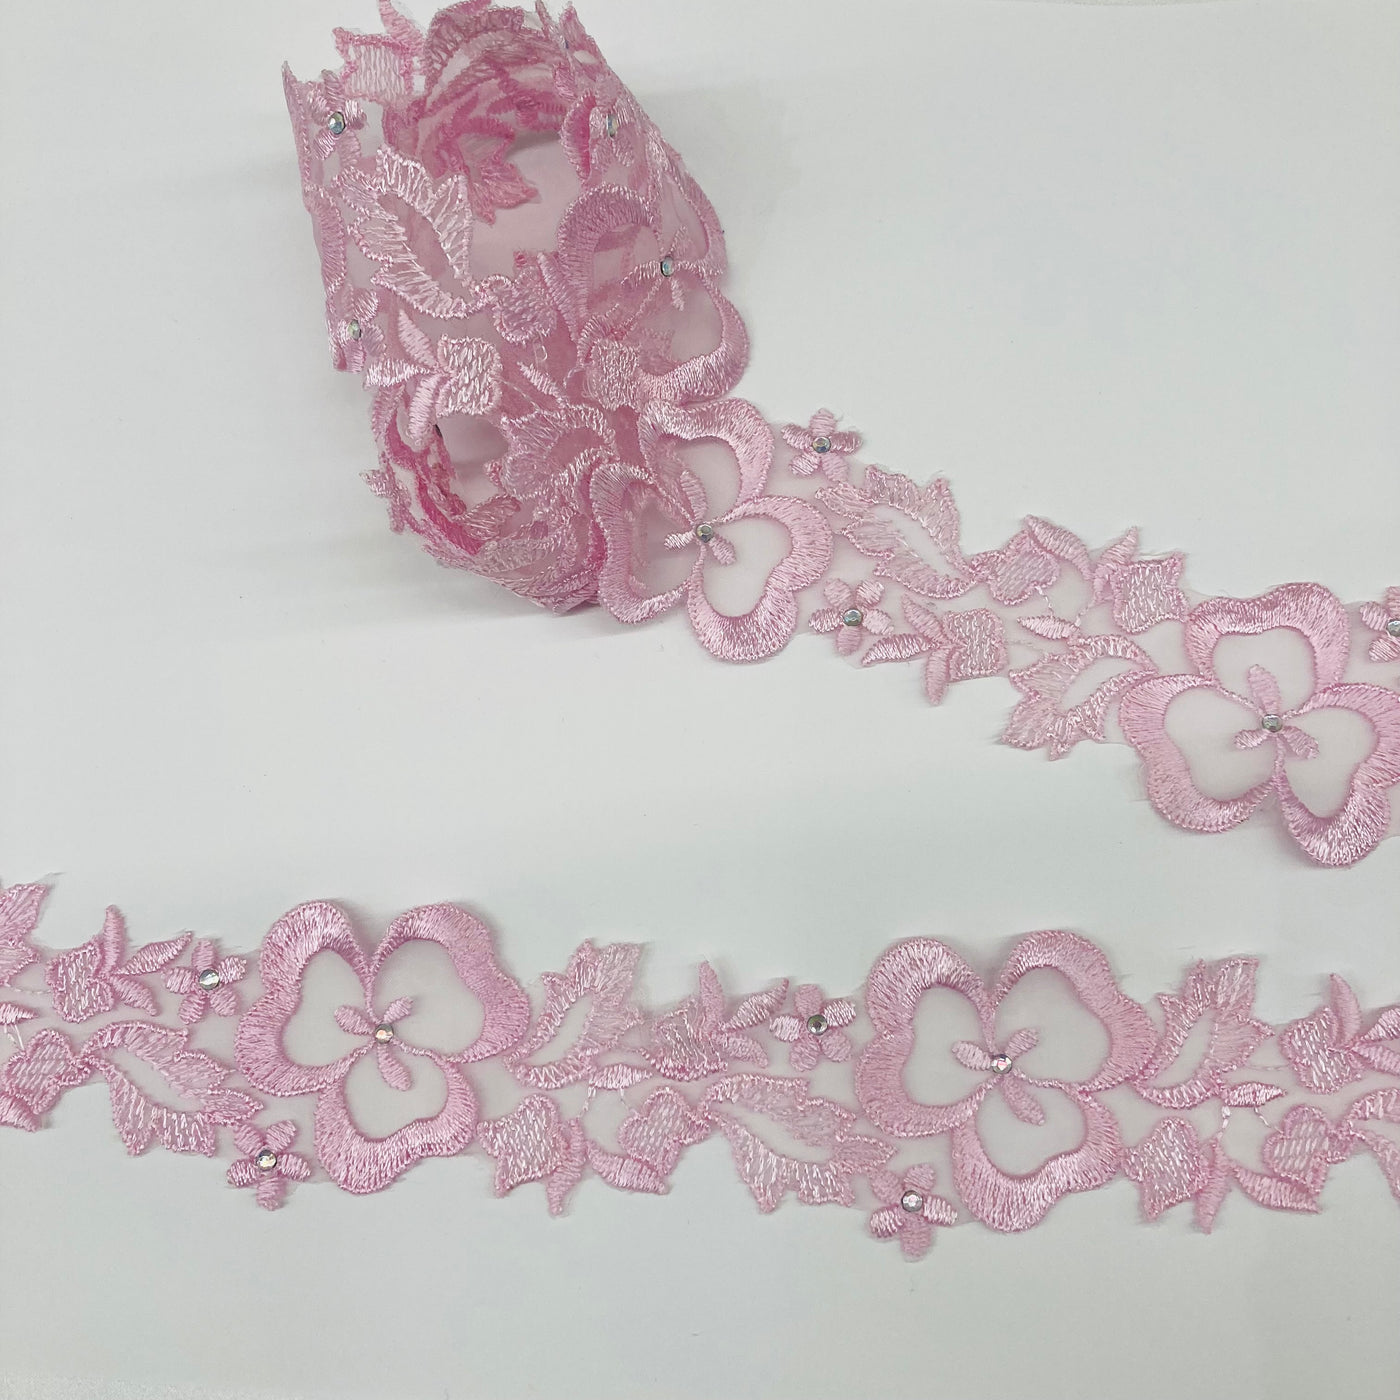 Beaded Lace Trimming Embroidered on 100% Poly. Organza. Lace USA